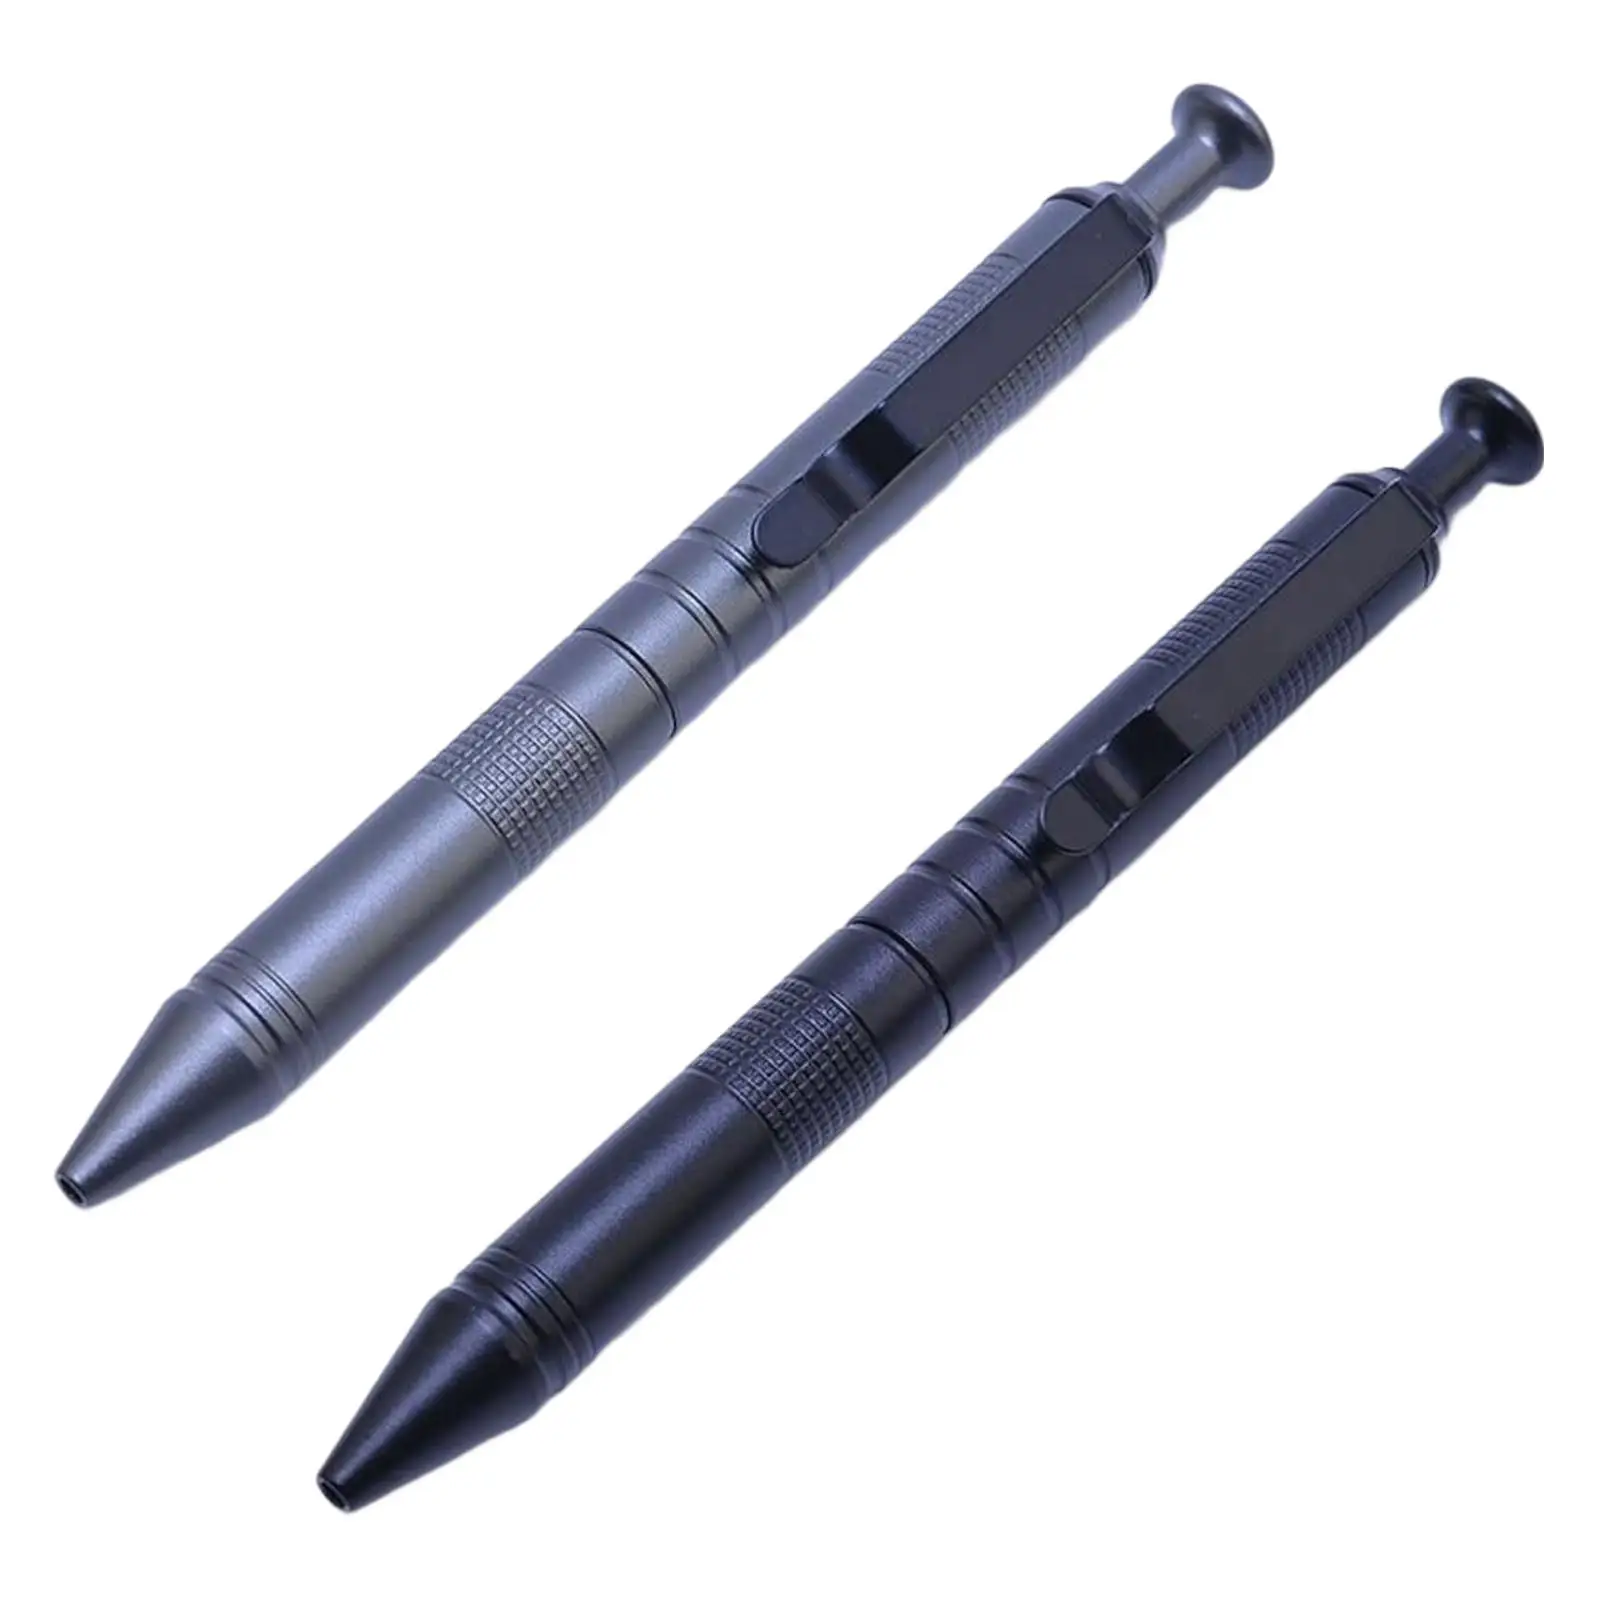 Signatures Personal Pen Outdoor Sports Accessories Tool Durable Pocket Multifunctional Supplies Sturdy Defensa Ballpoint Pen